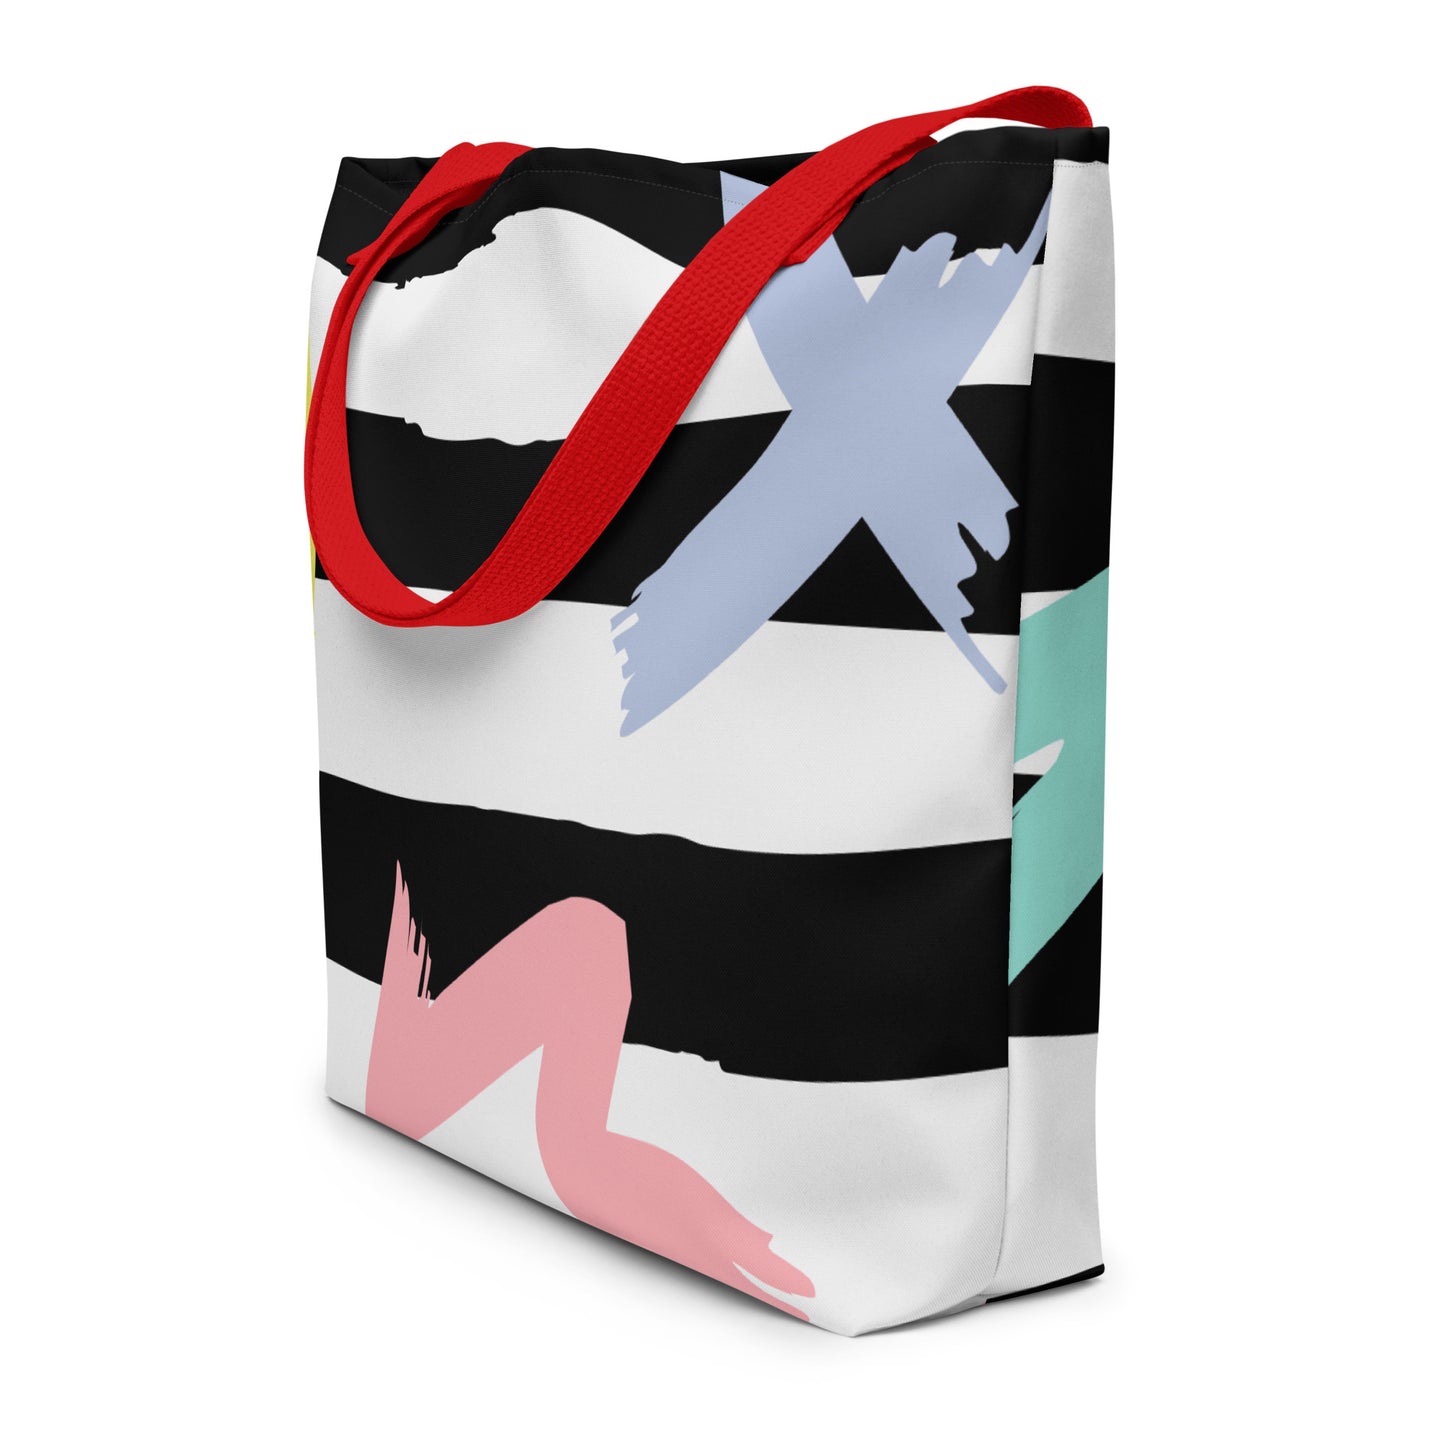 Swatch Tote